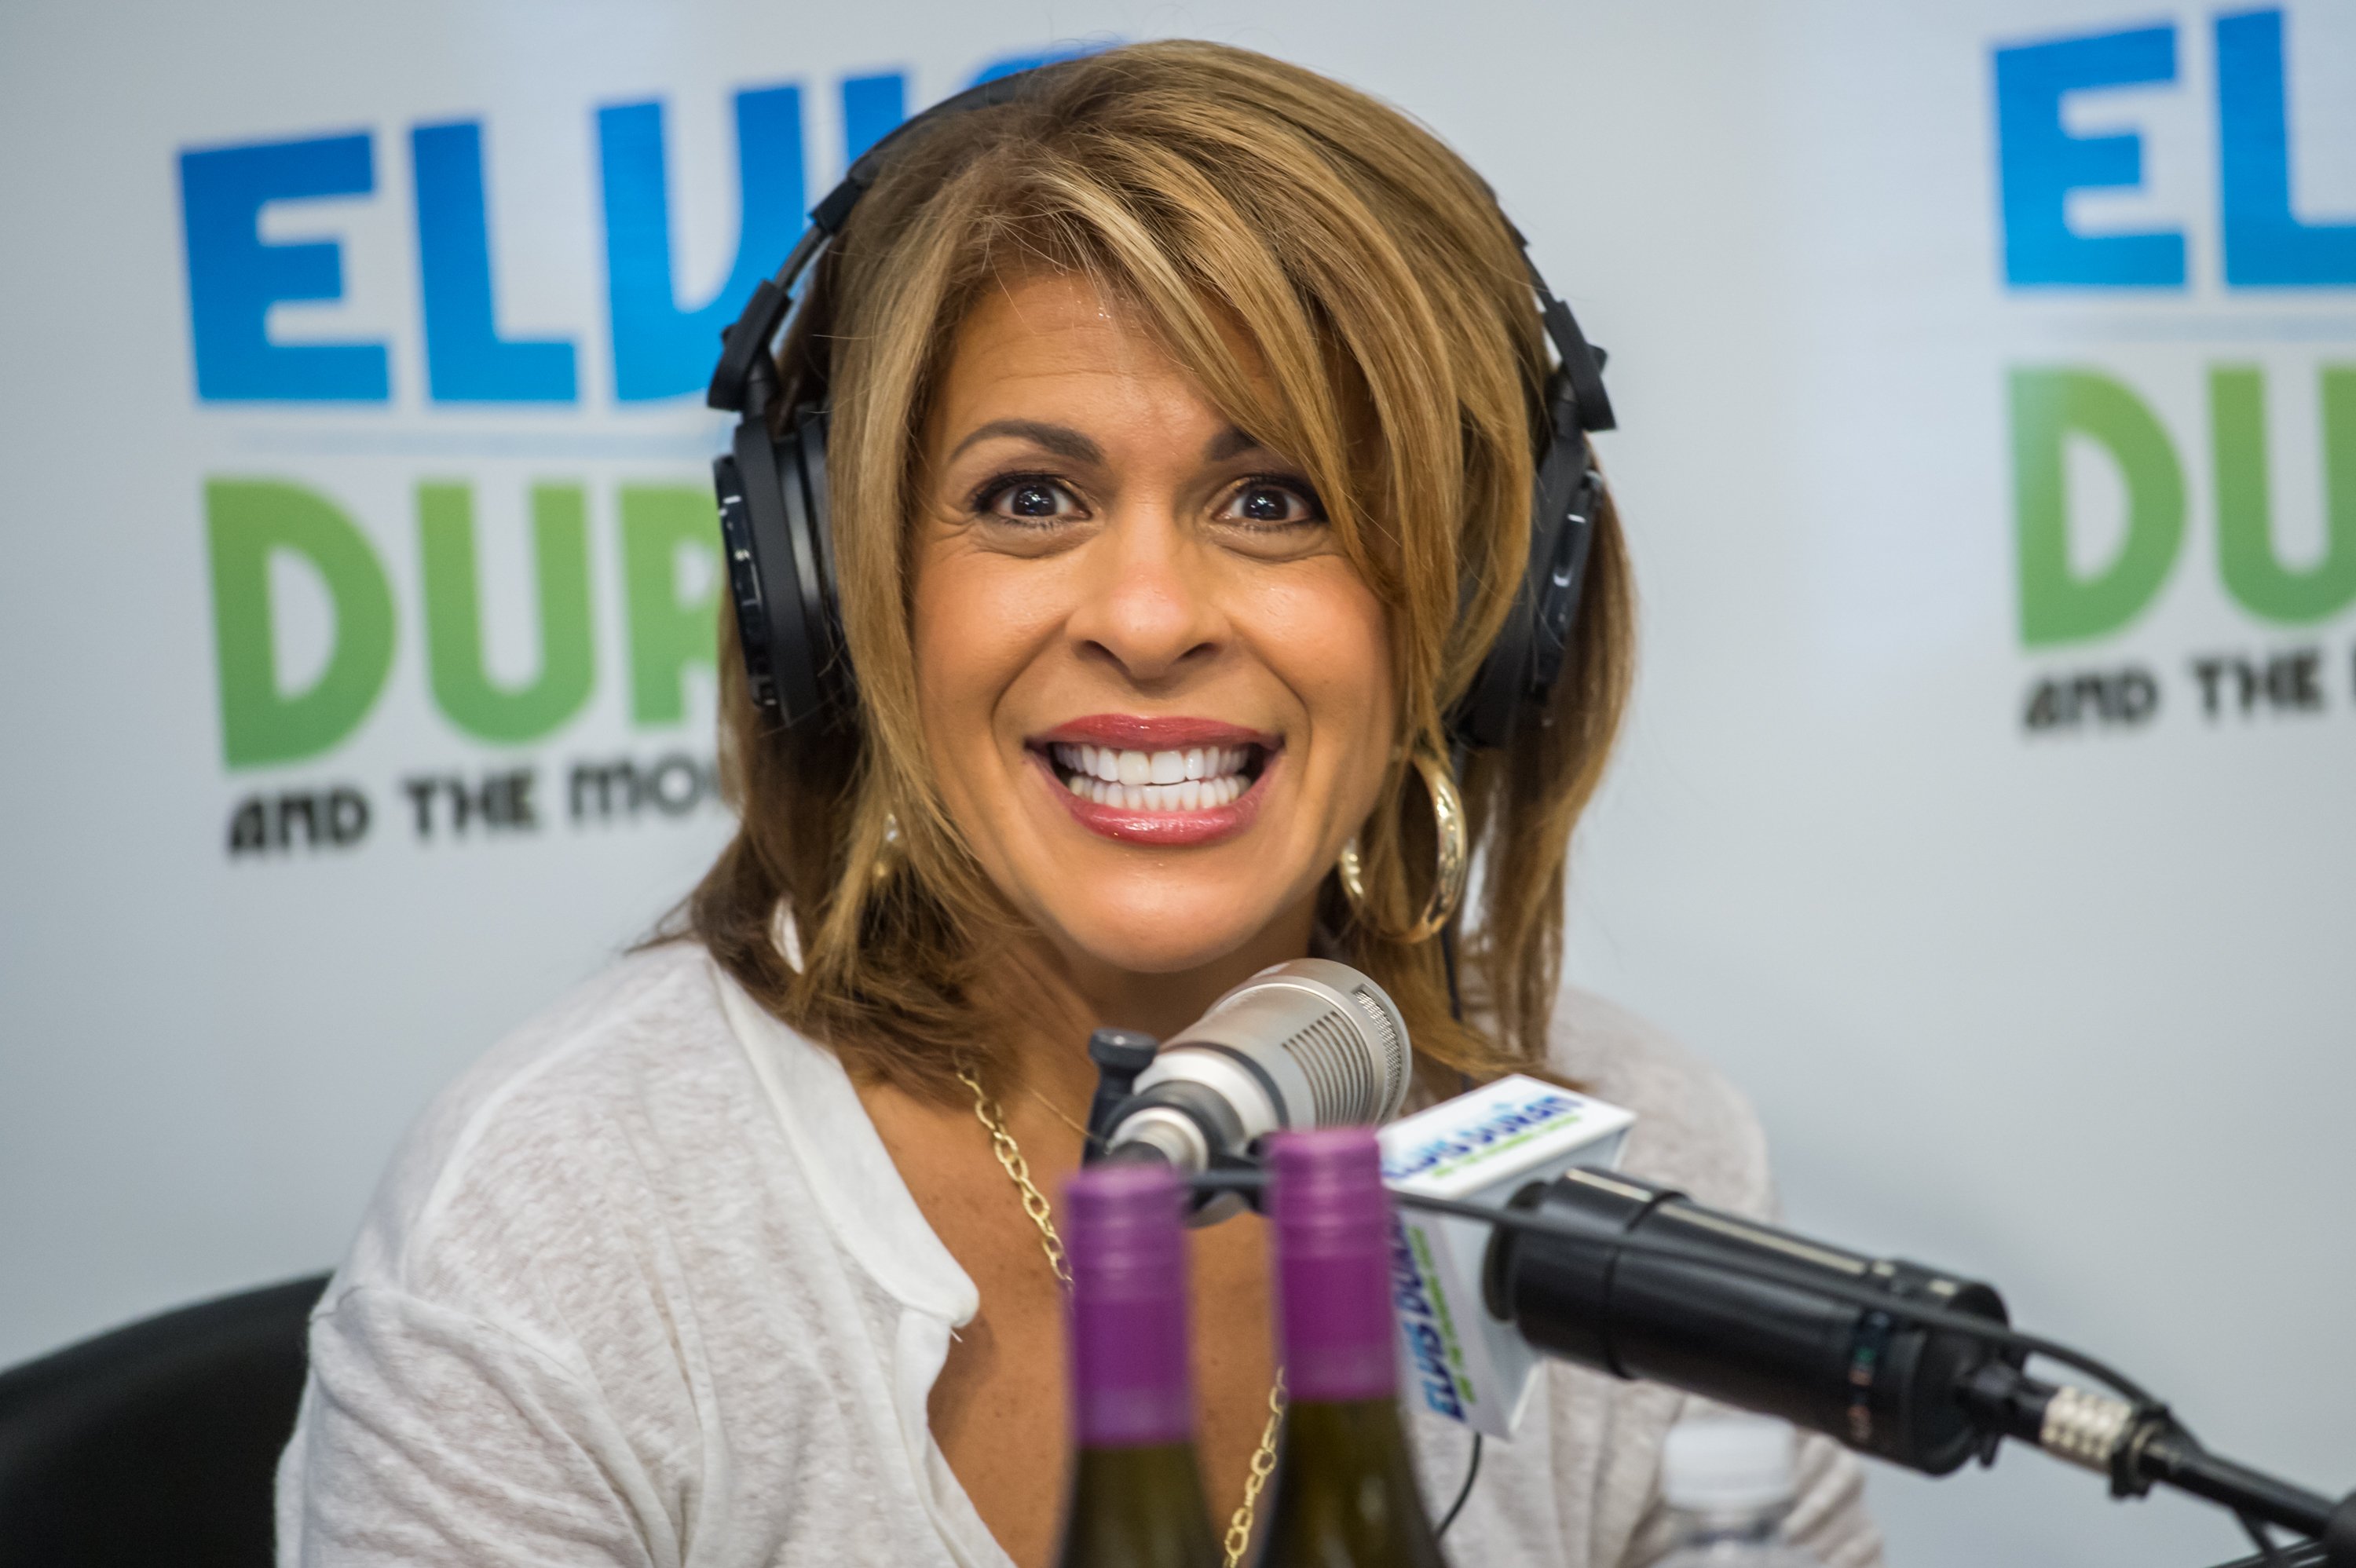 "Today" host Hoda Kotb during her 2015 visit in Z100 Studio's "The Elvis Duran Z100 Morning Show" in New York City. | Photo: Getty Images